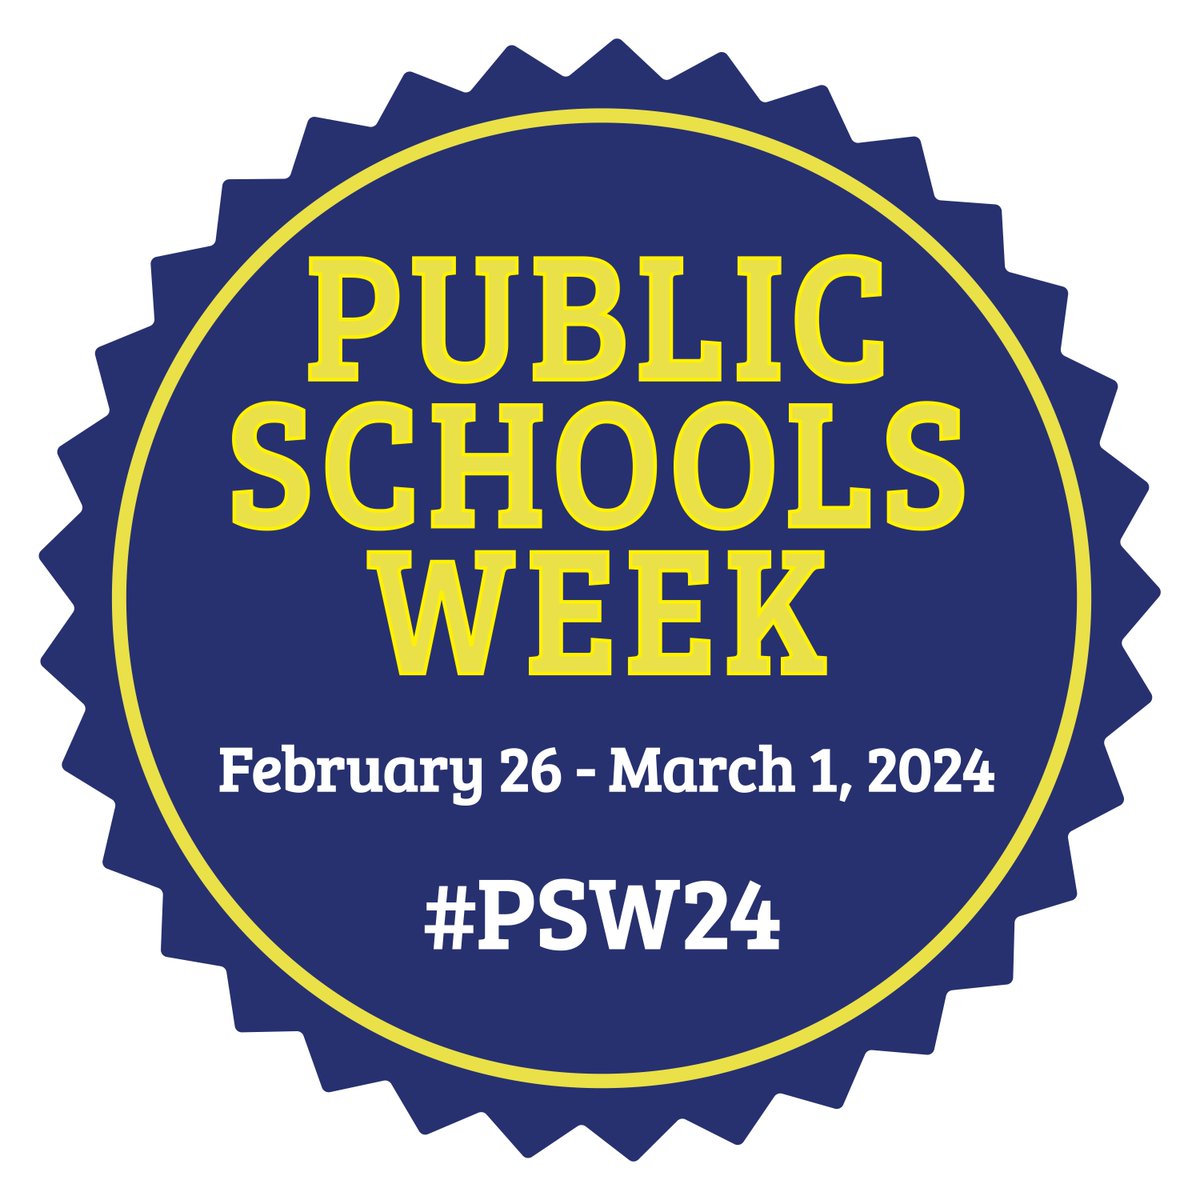 Teachers and staff at public schools across Missouri are working hard every day to provide all students access to opportunities. Join us in celebrating Public Schools Week February 26-March 1. #PSW24 #WeServeMo